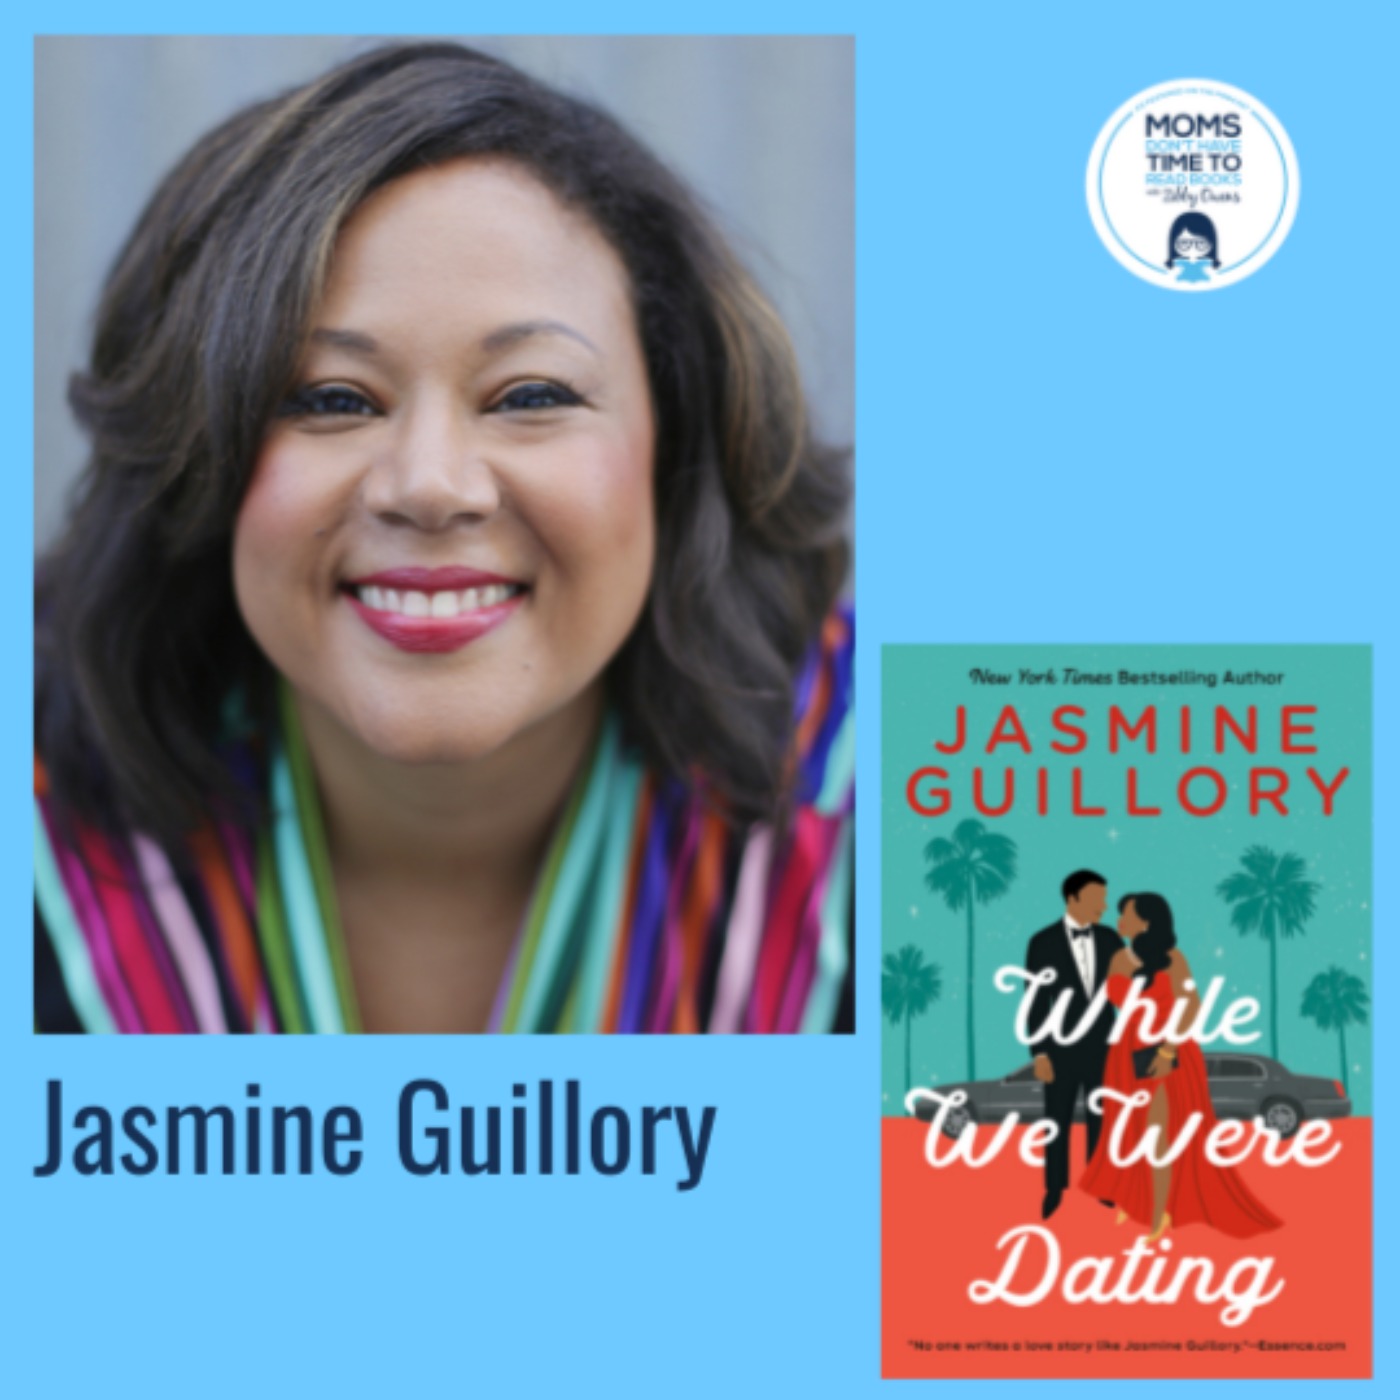 Jasmine Guillory, WHILE WE WERE DATING